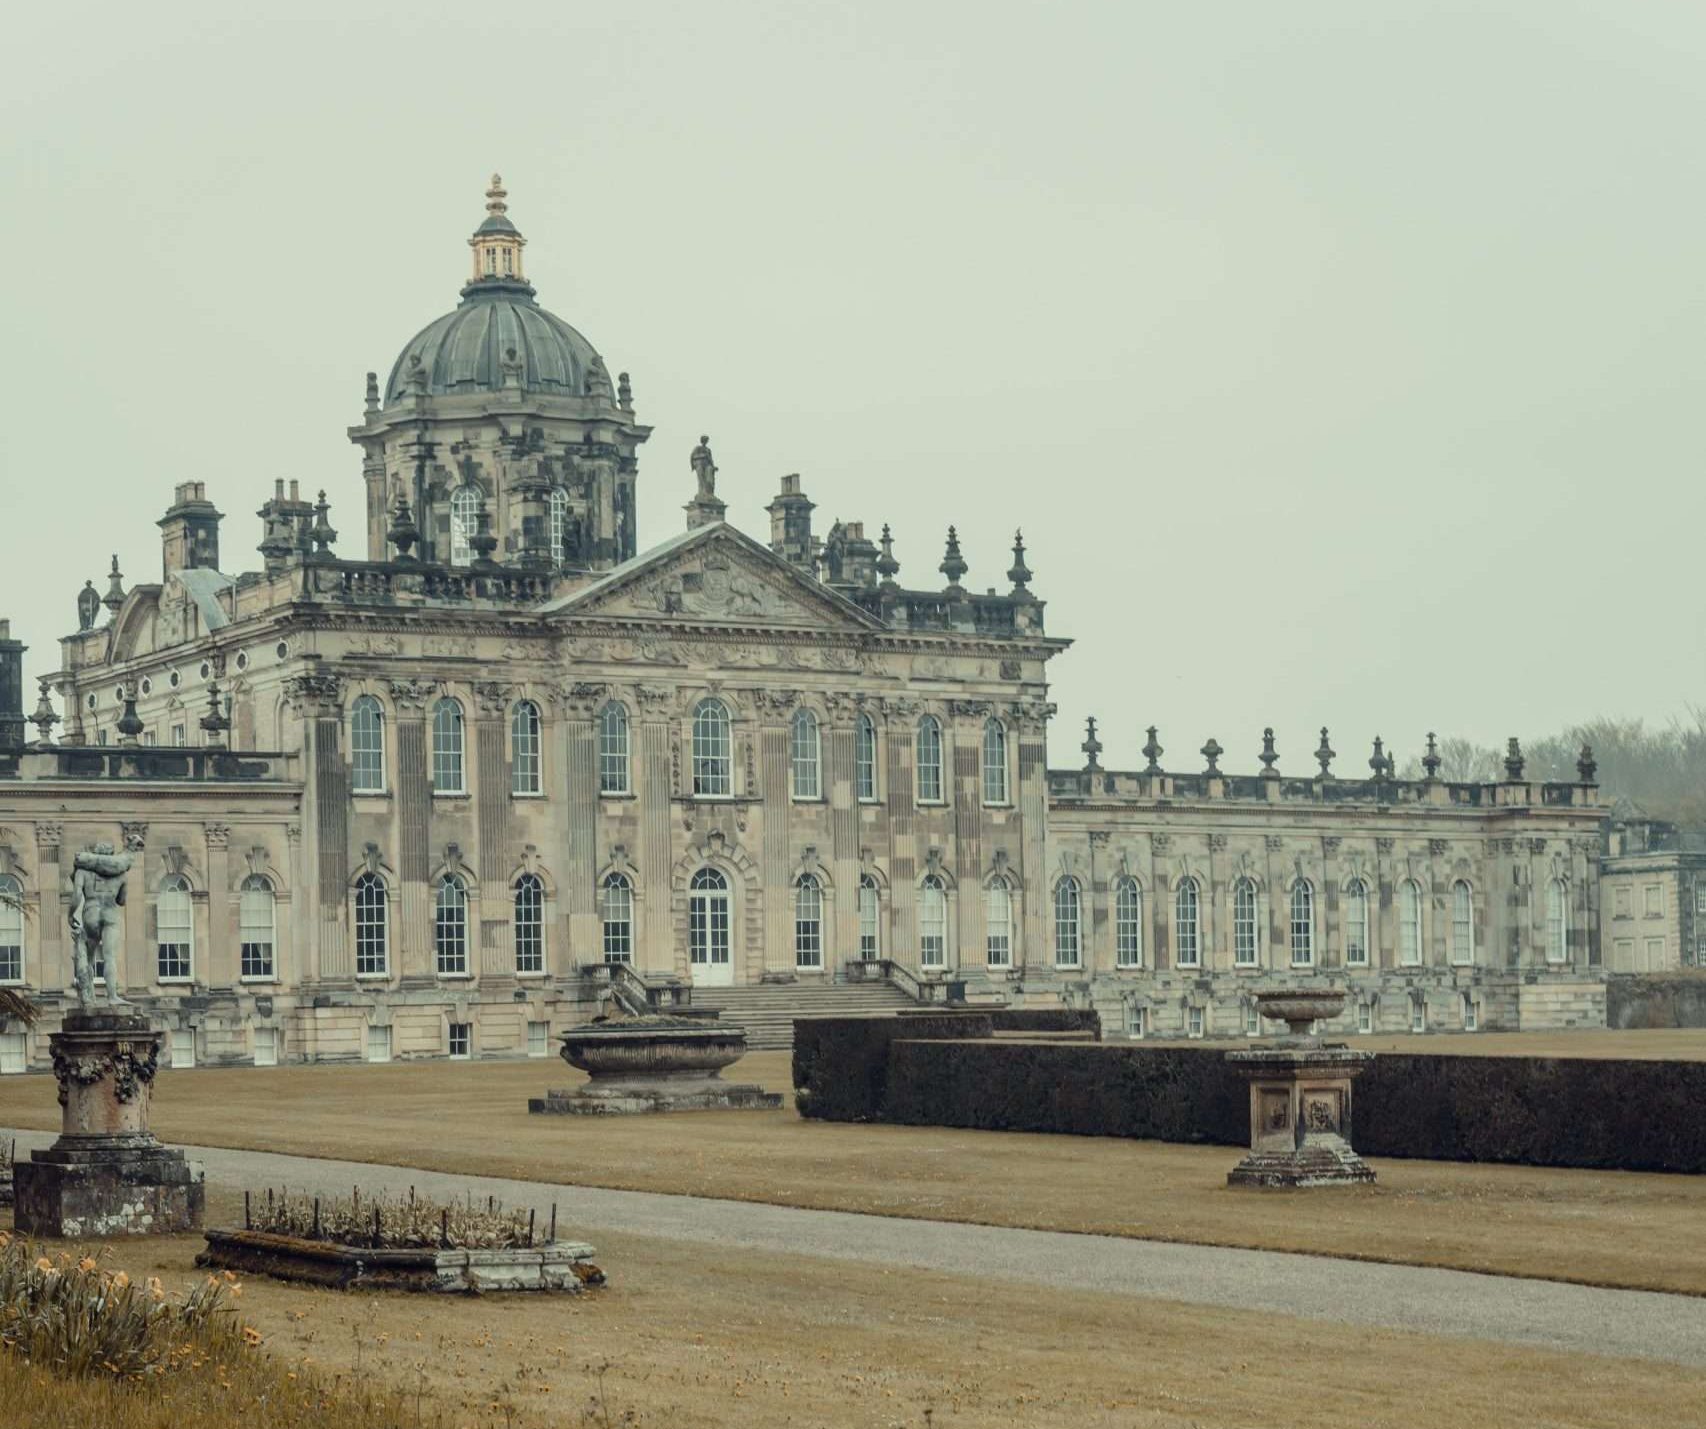 iconic filming location - Castle Howard